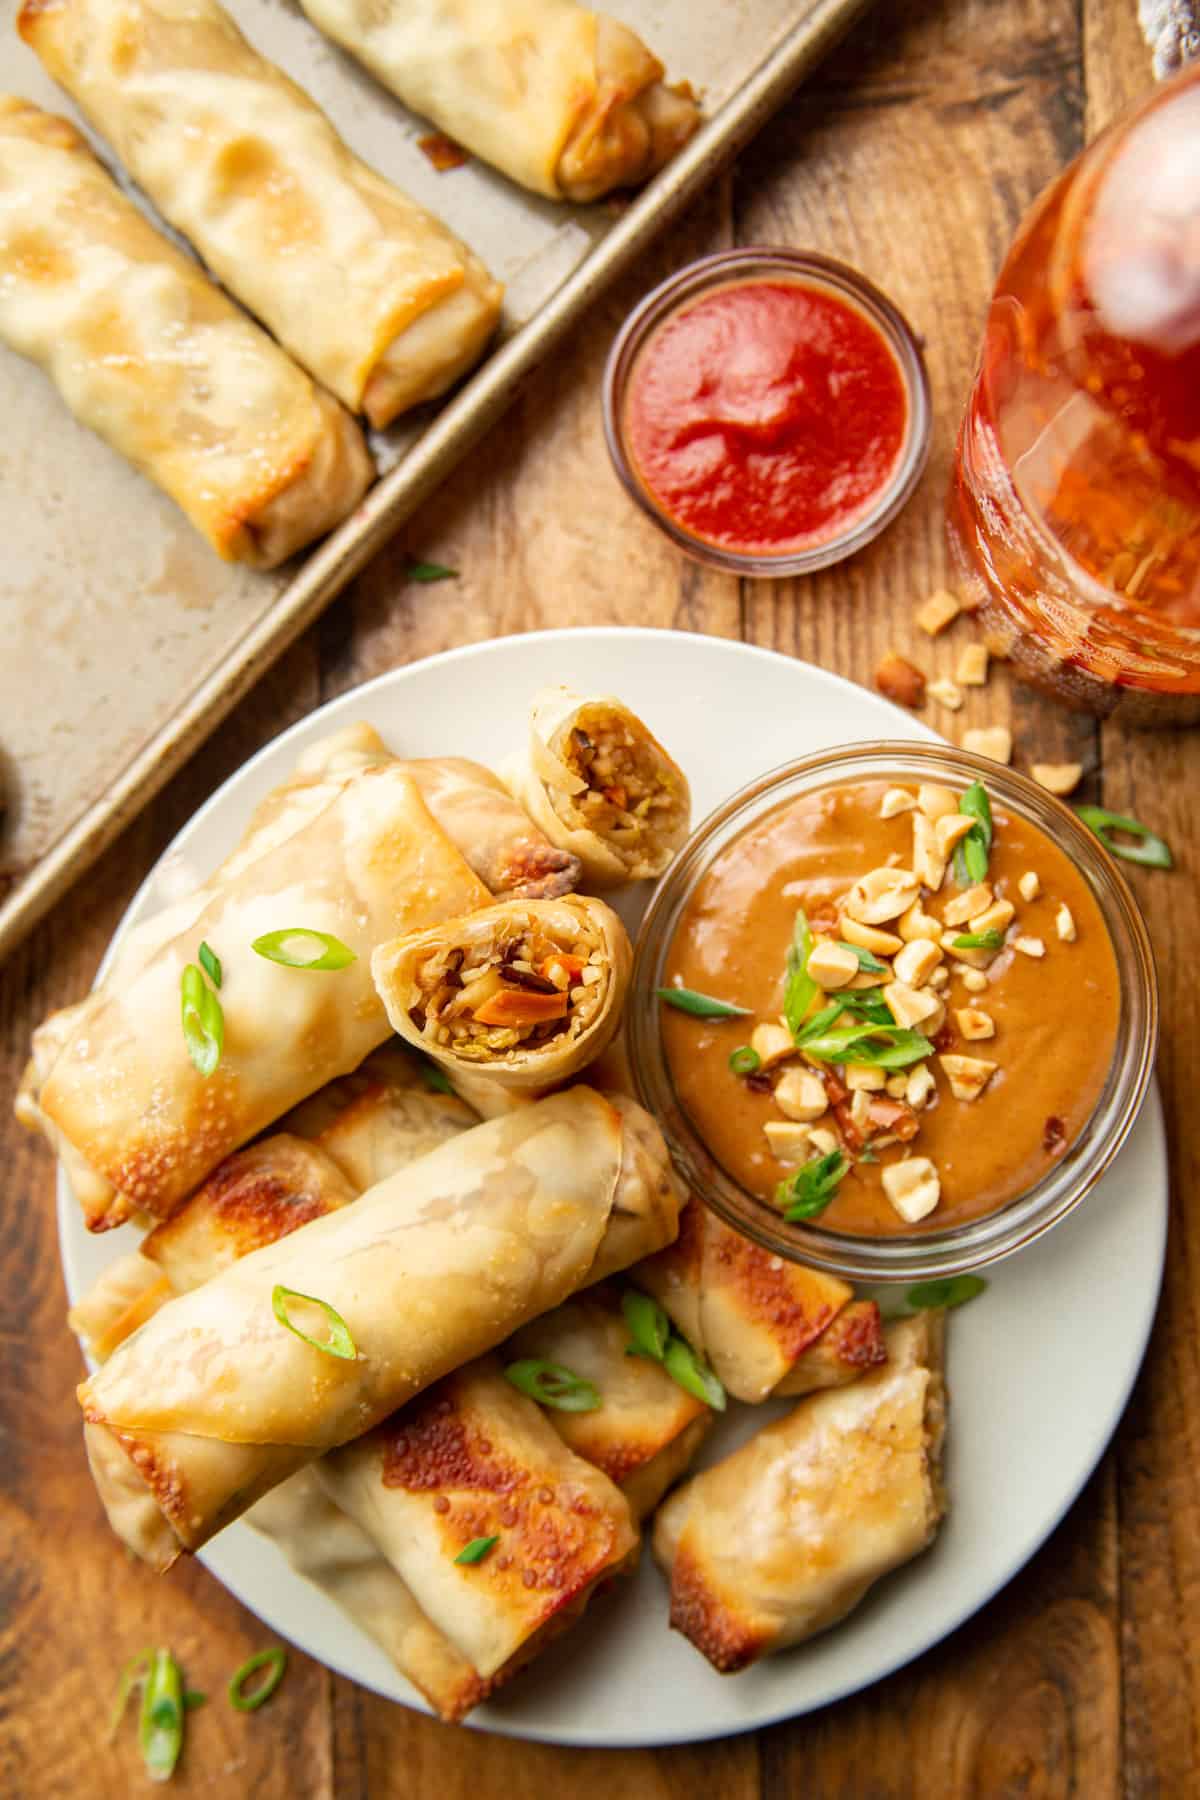 Wooden surface set with baking sheet, bottle of sriracha, and plate of vegetable spring rolls.